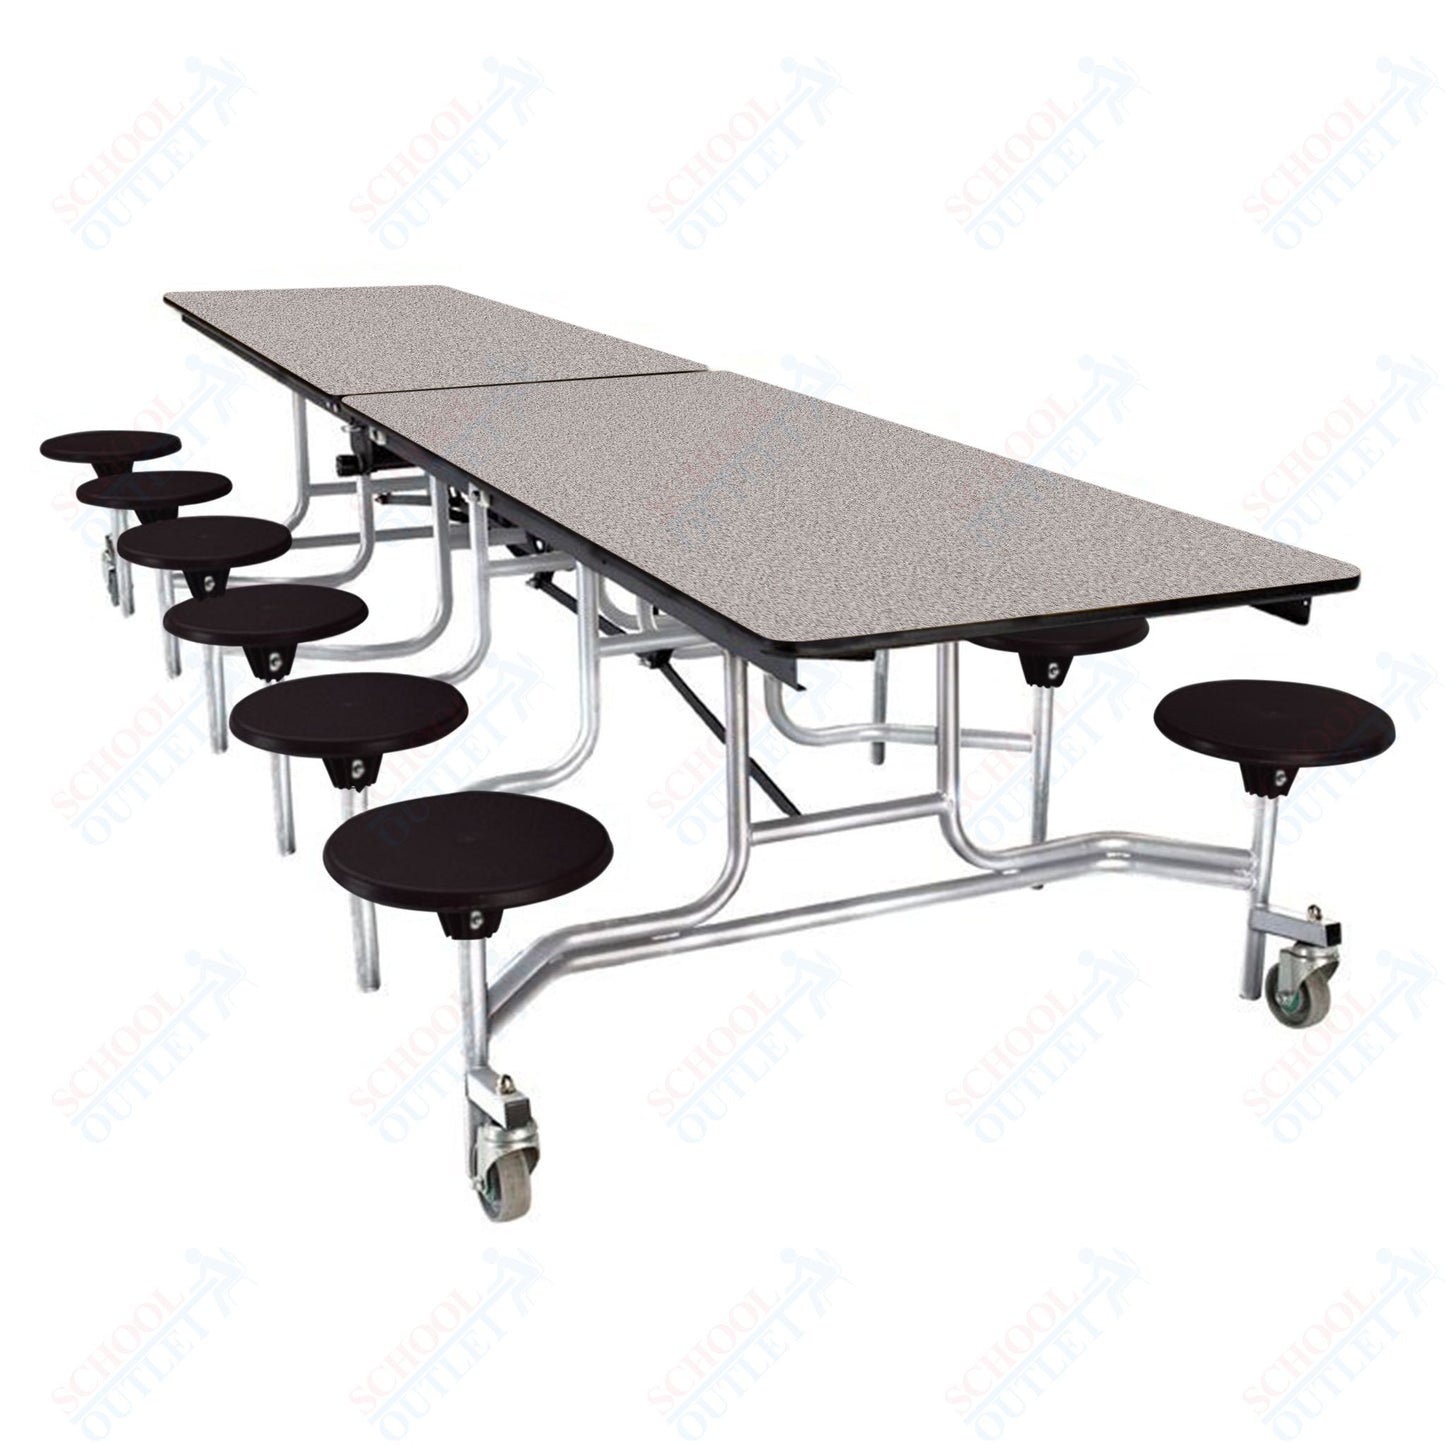 NPS Mobile Cafeteria Table - 30" W x 10' L - 12 Stools  - MDF Core - Protect Edge - Black Powdercoated Frame